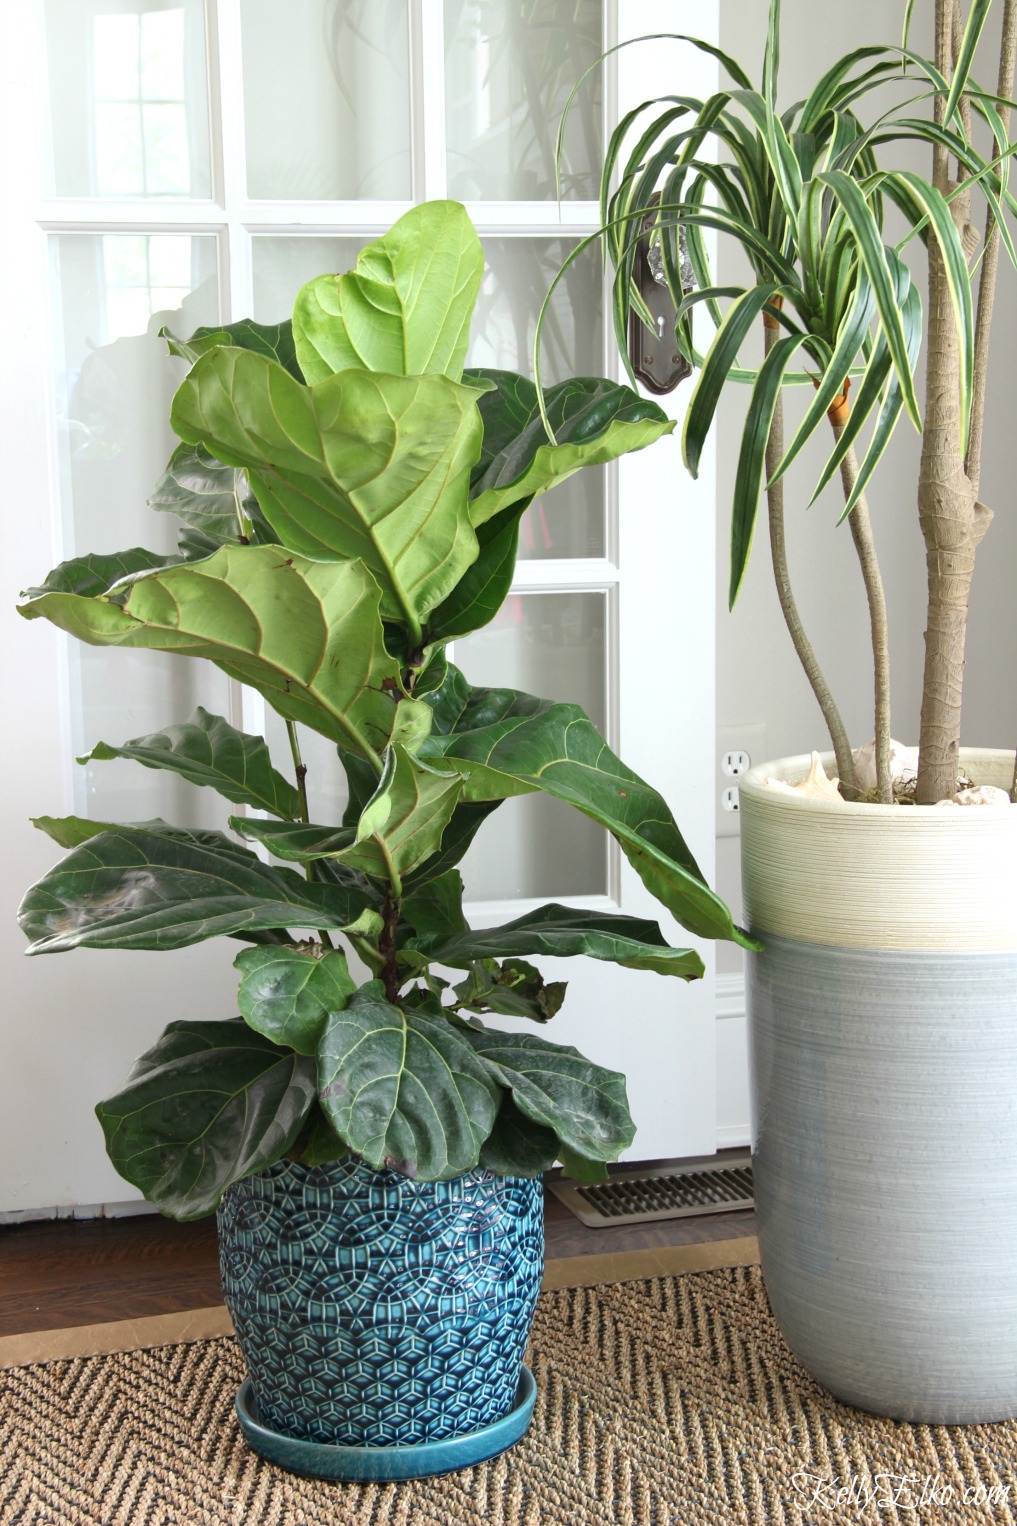 What the Fig? Fiddle Leaf Fig Care Tips